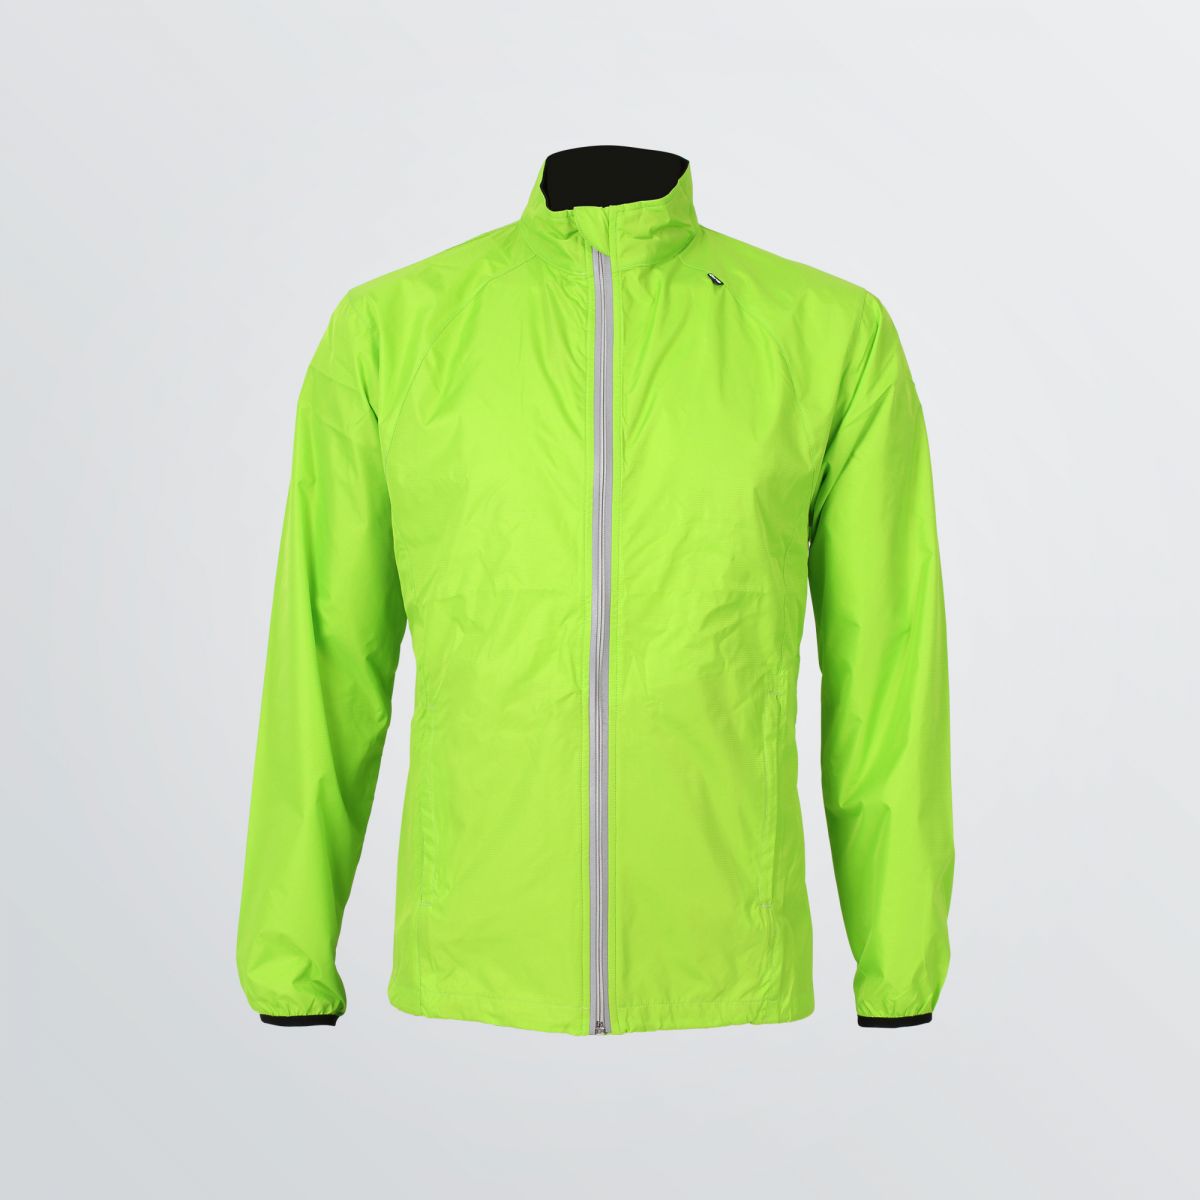 customisable Basic Sport Jacket made of breathable and wind resistant functional fabric depicted as a product example in neon green colour - front view